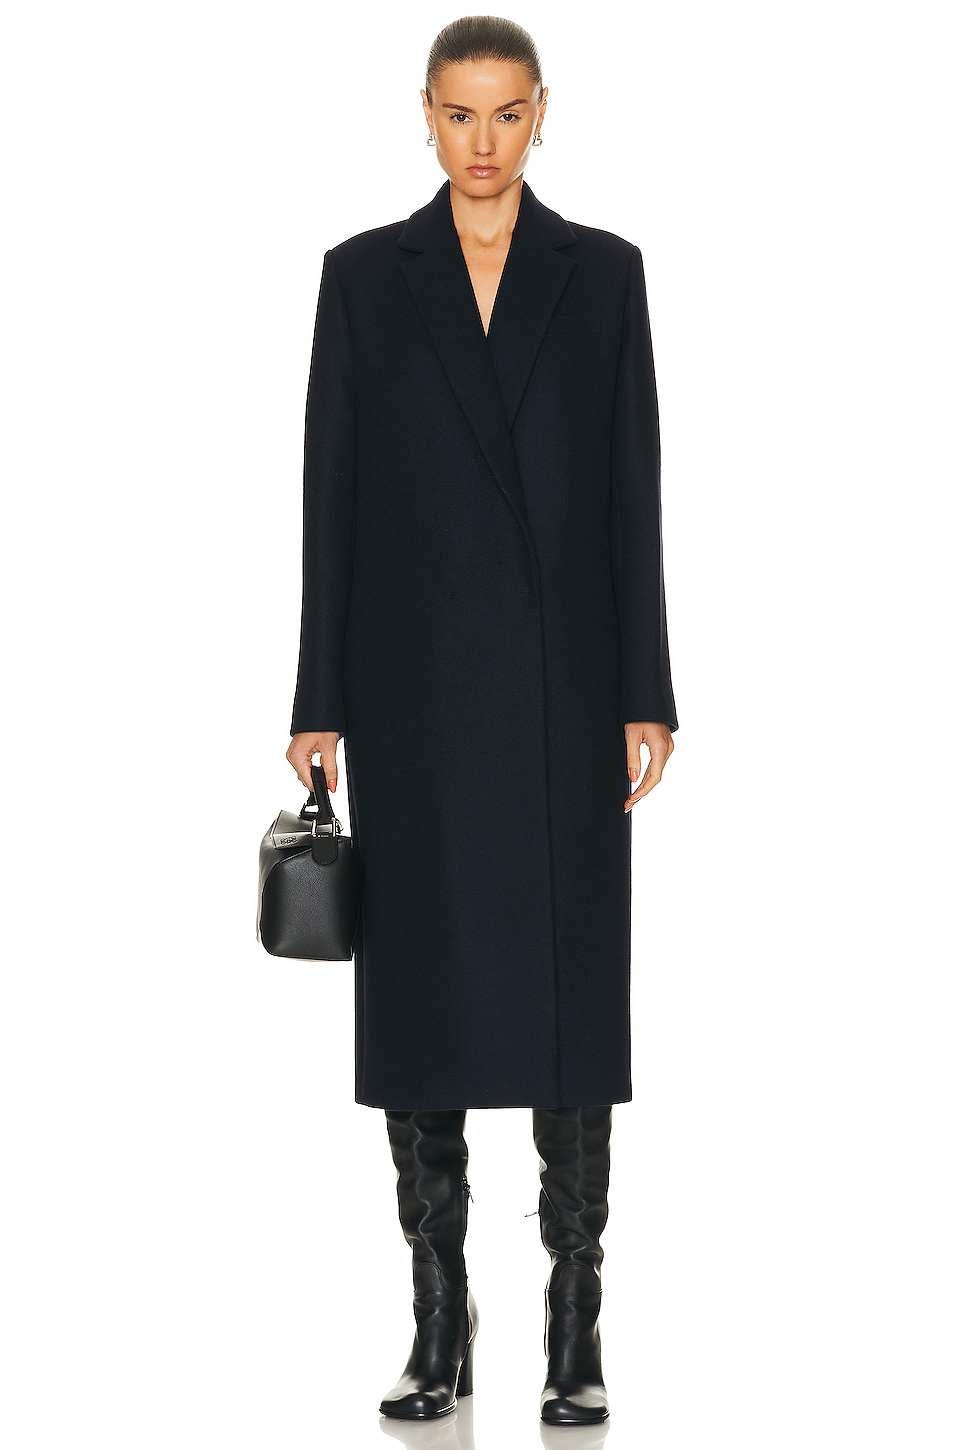 Image 1 of Loewe Tailored Coat in Midnight Blue